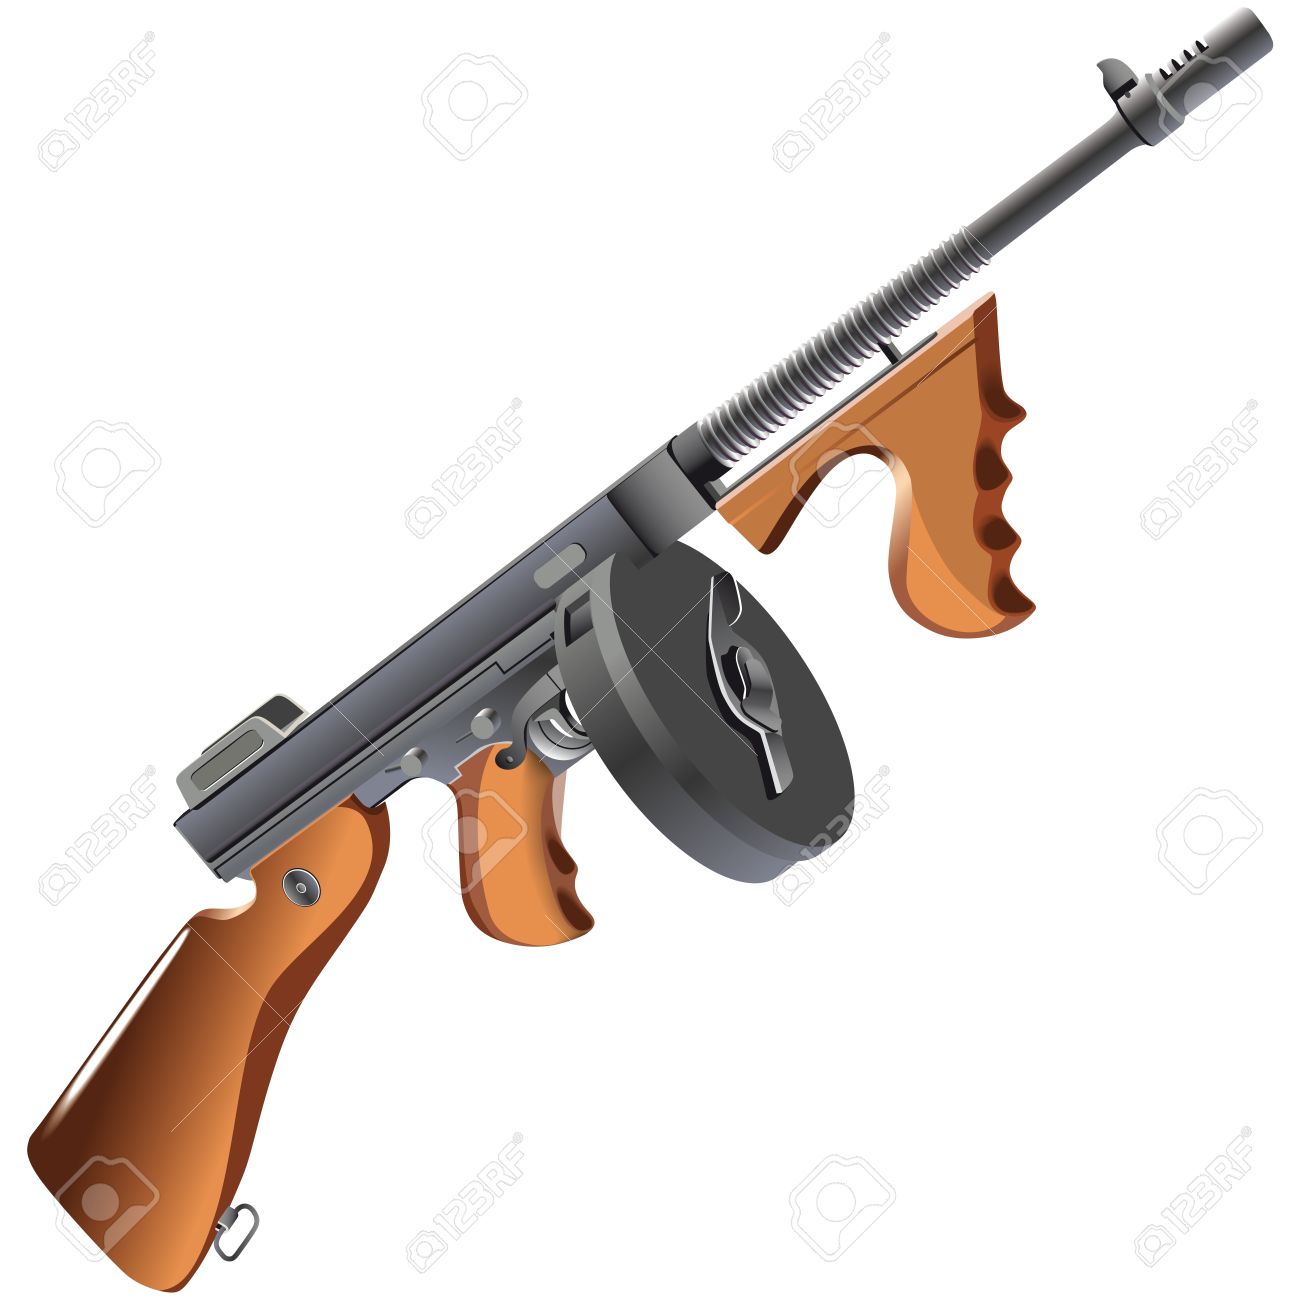 266 Tommy Gun Cliparts, Stock Vector And Royalty Free Tommy Gun.